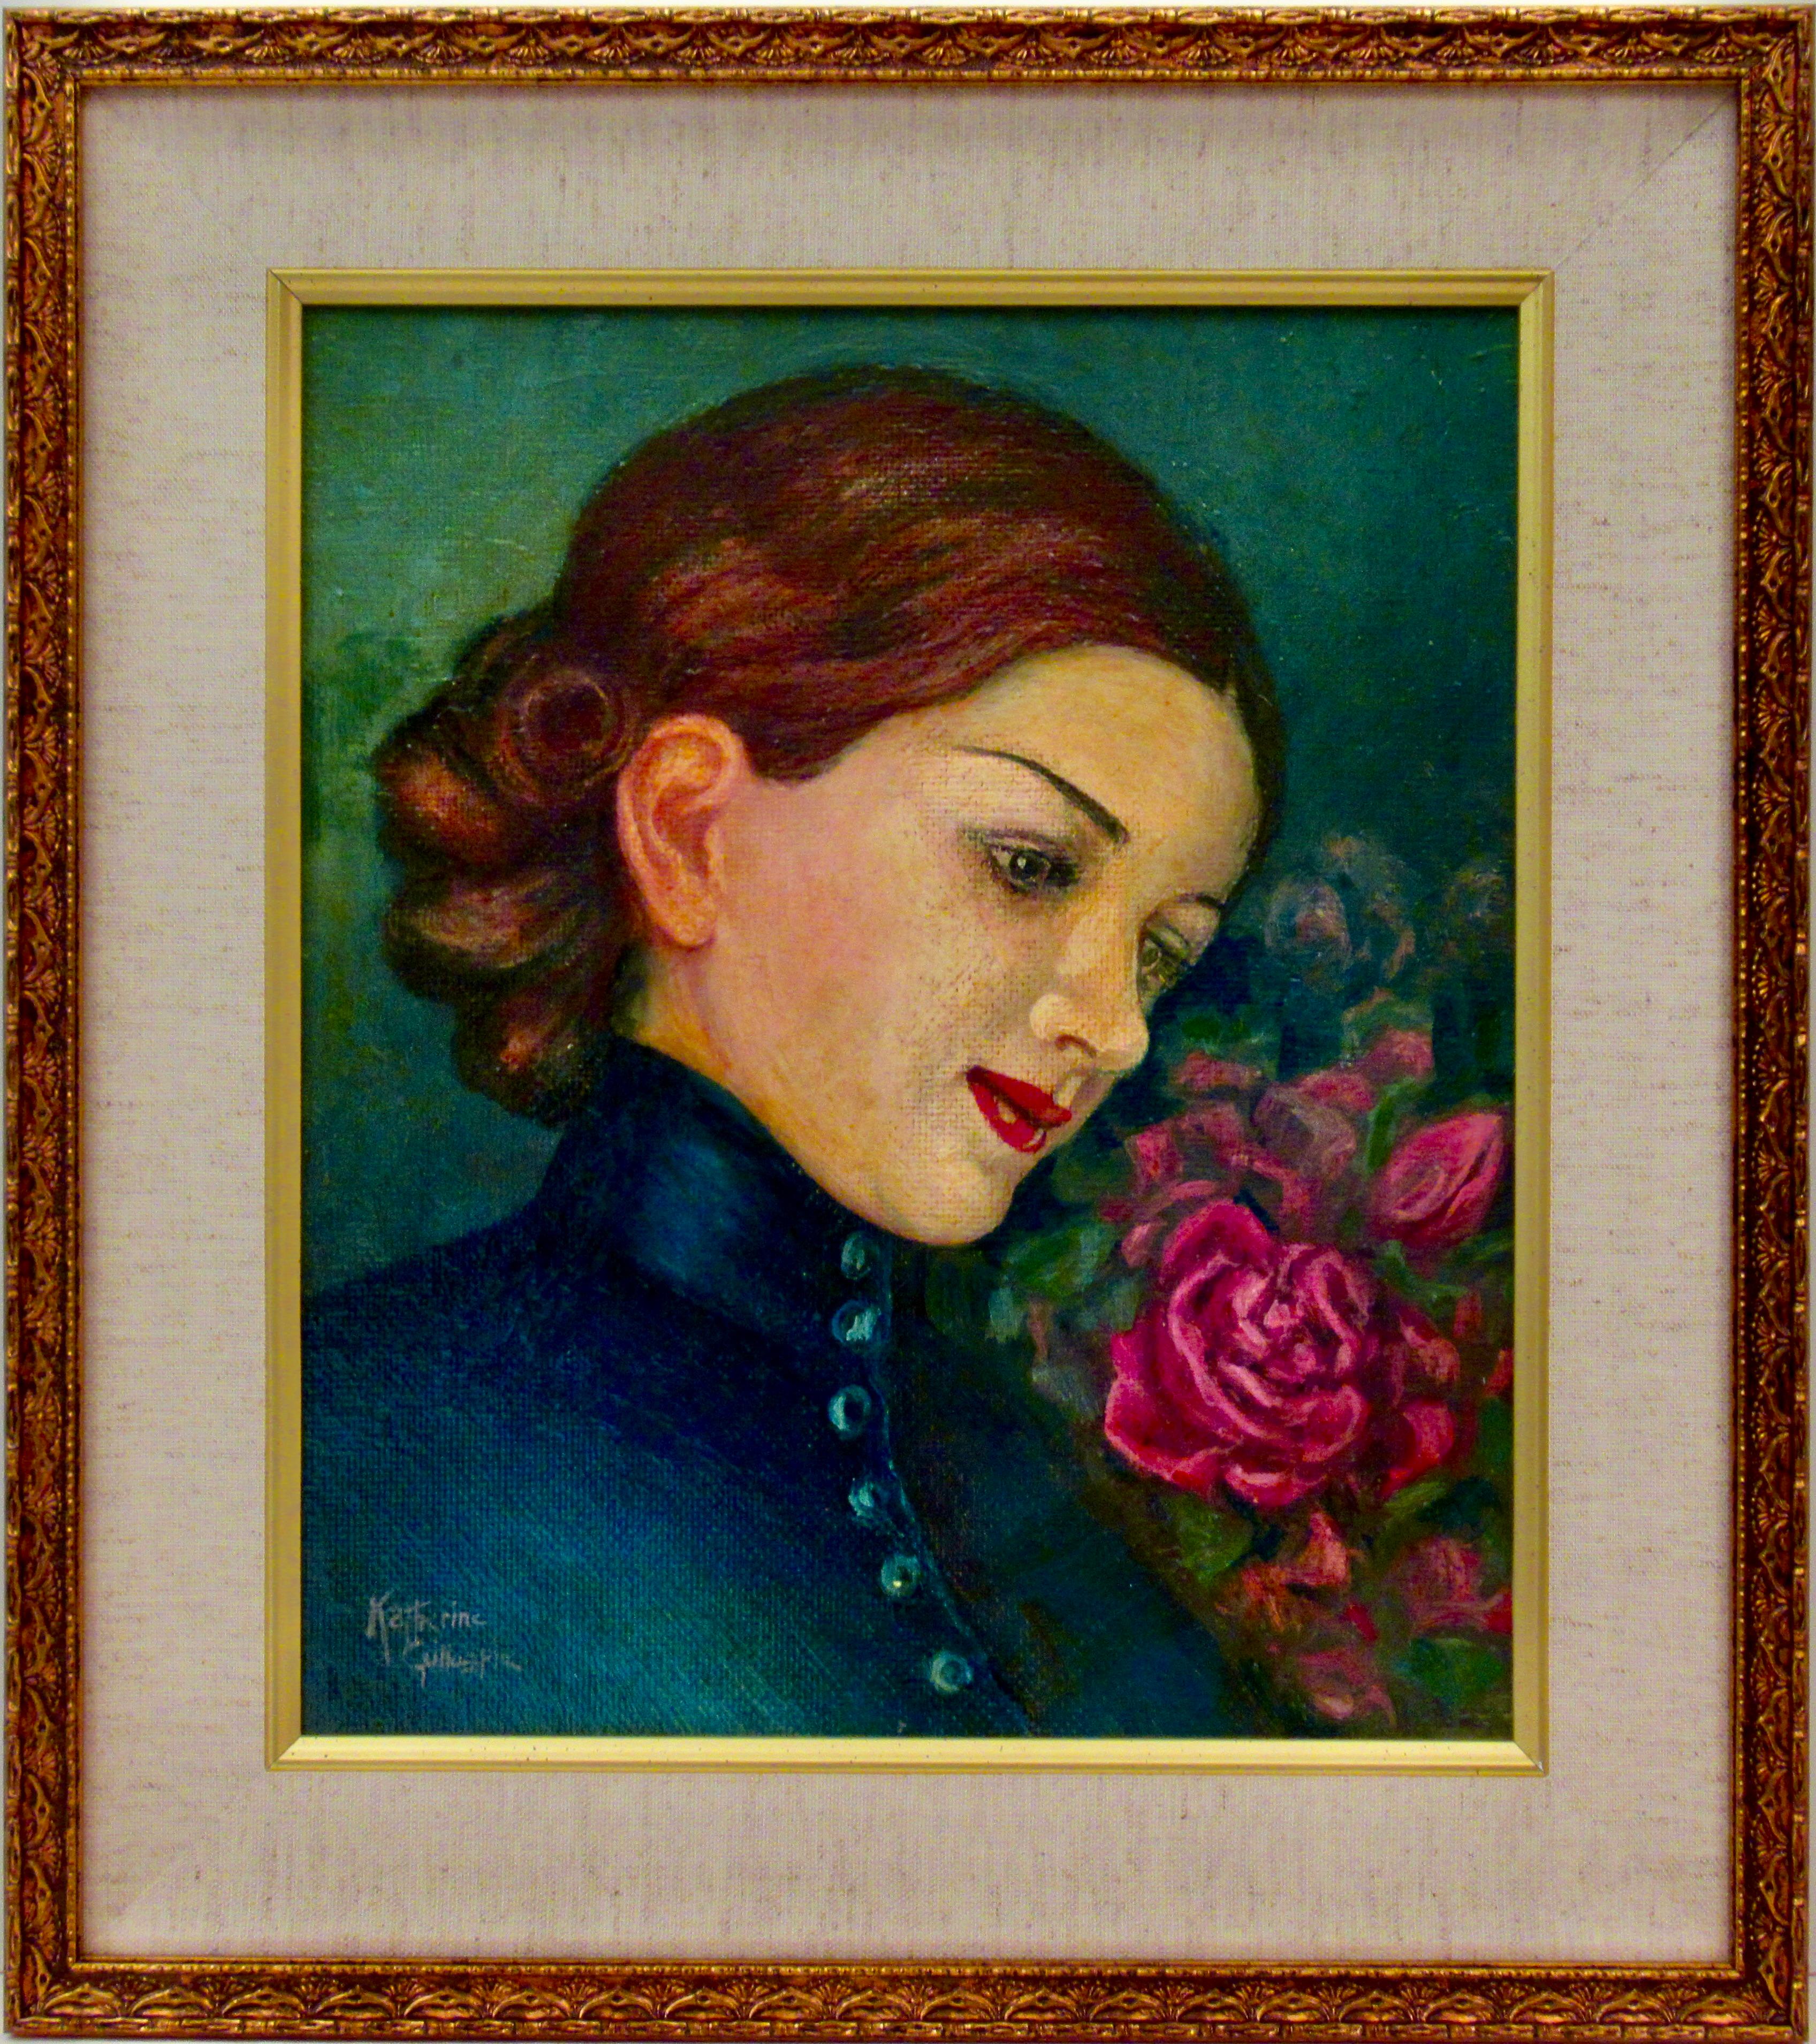 Katherine gillespie Figurative Painting - Woman with Roses